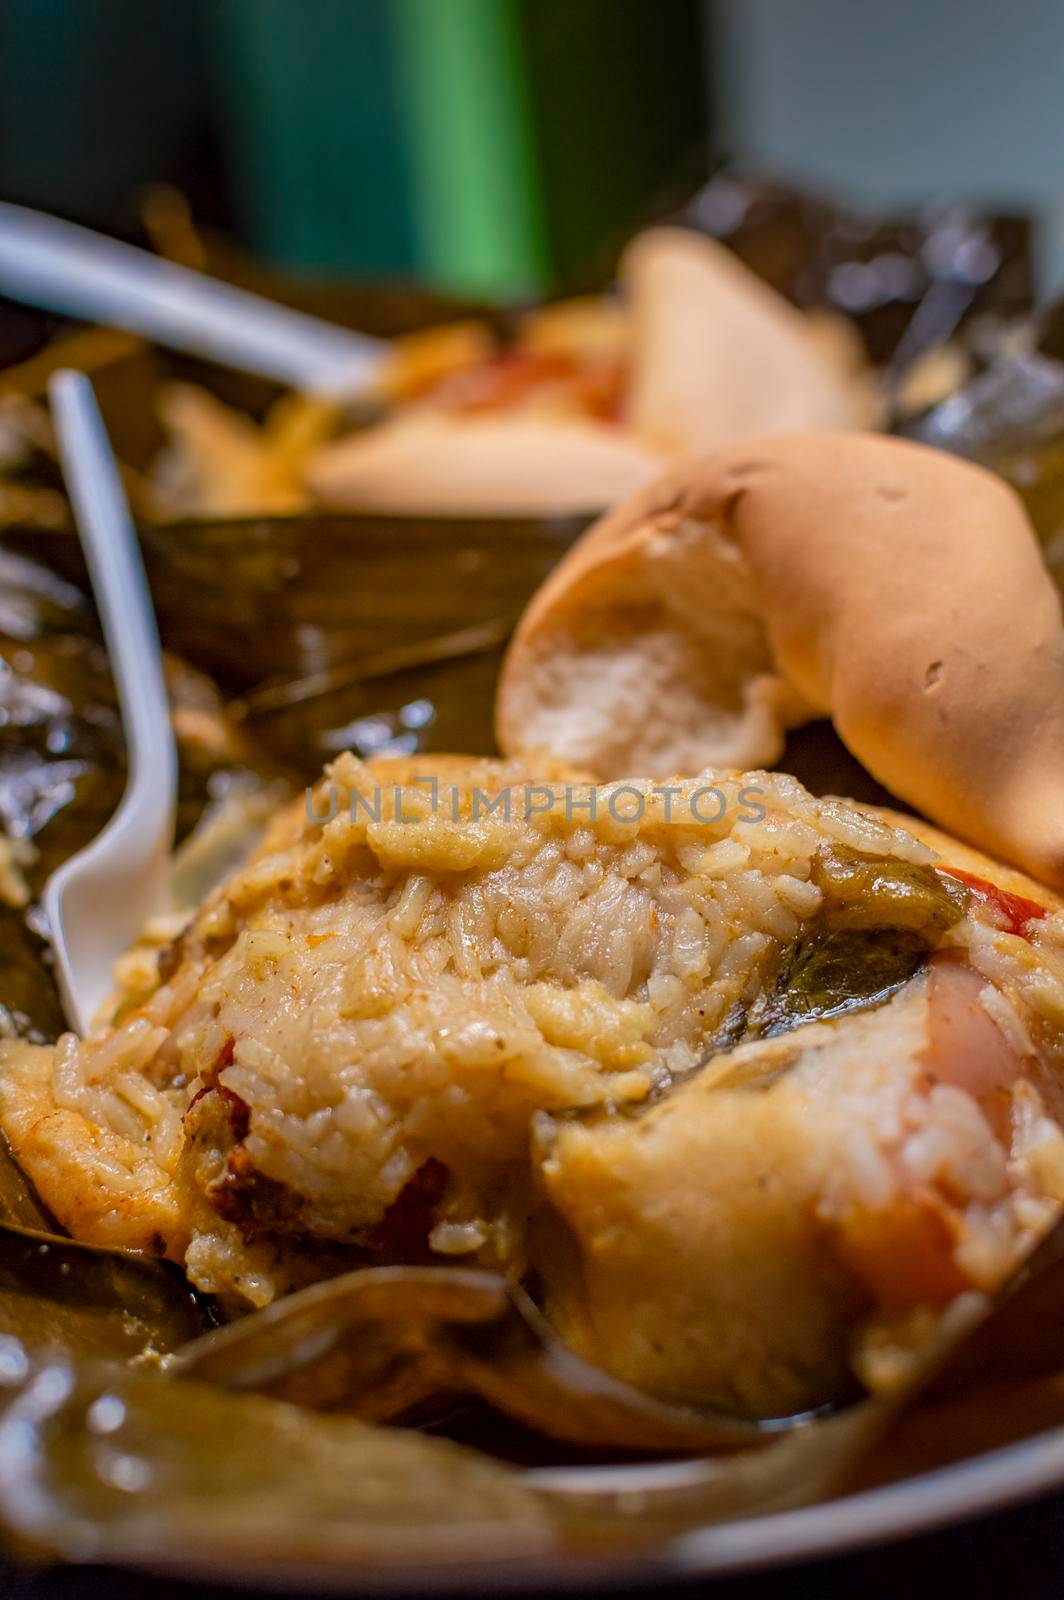 Nacatamales with bread served on table, Traditional Hallaca served. Close up of two Nacatamales in banana leaf served on table. Two Nacatamales served in a banana leaf on a wooden table by isaiphoto